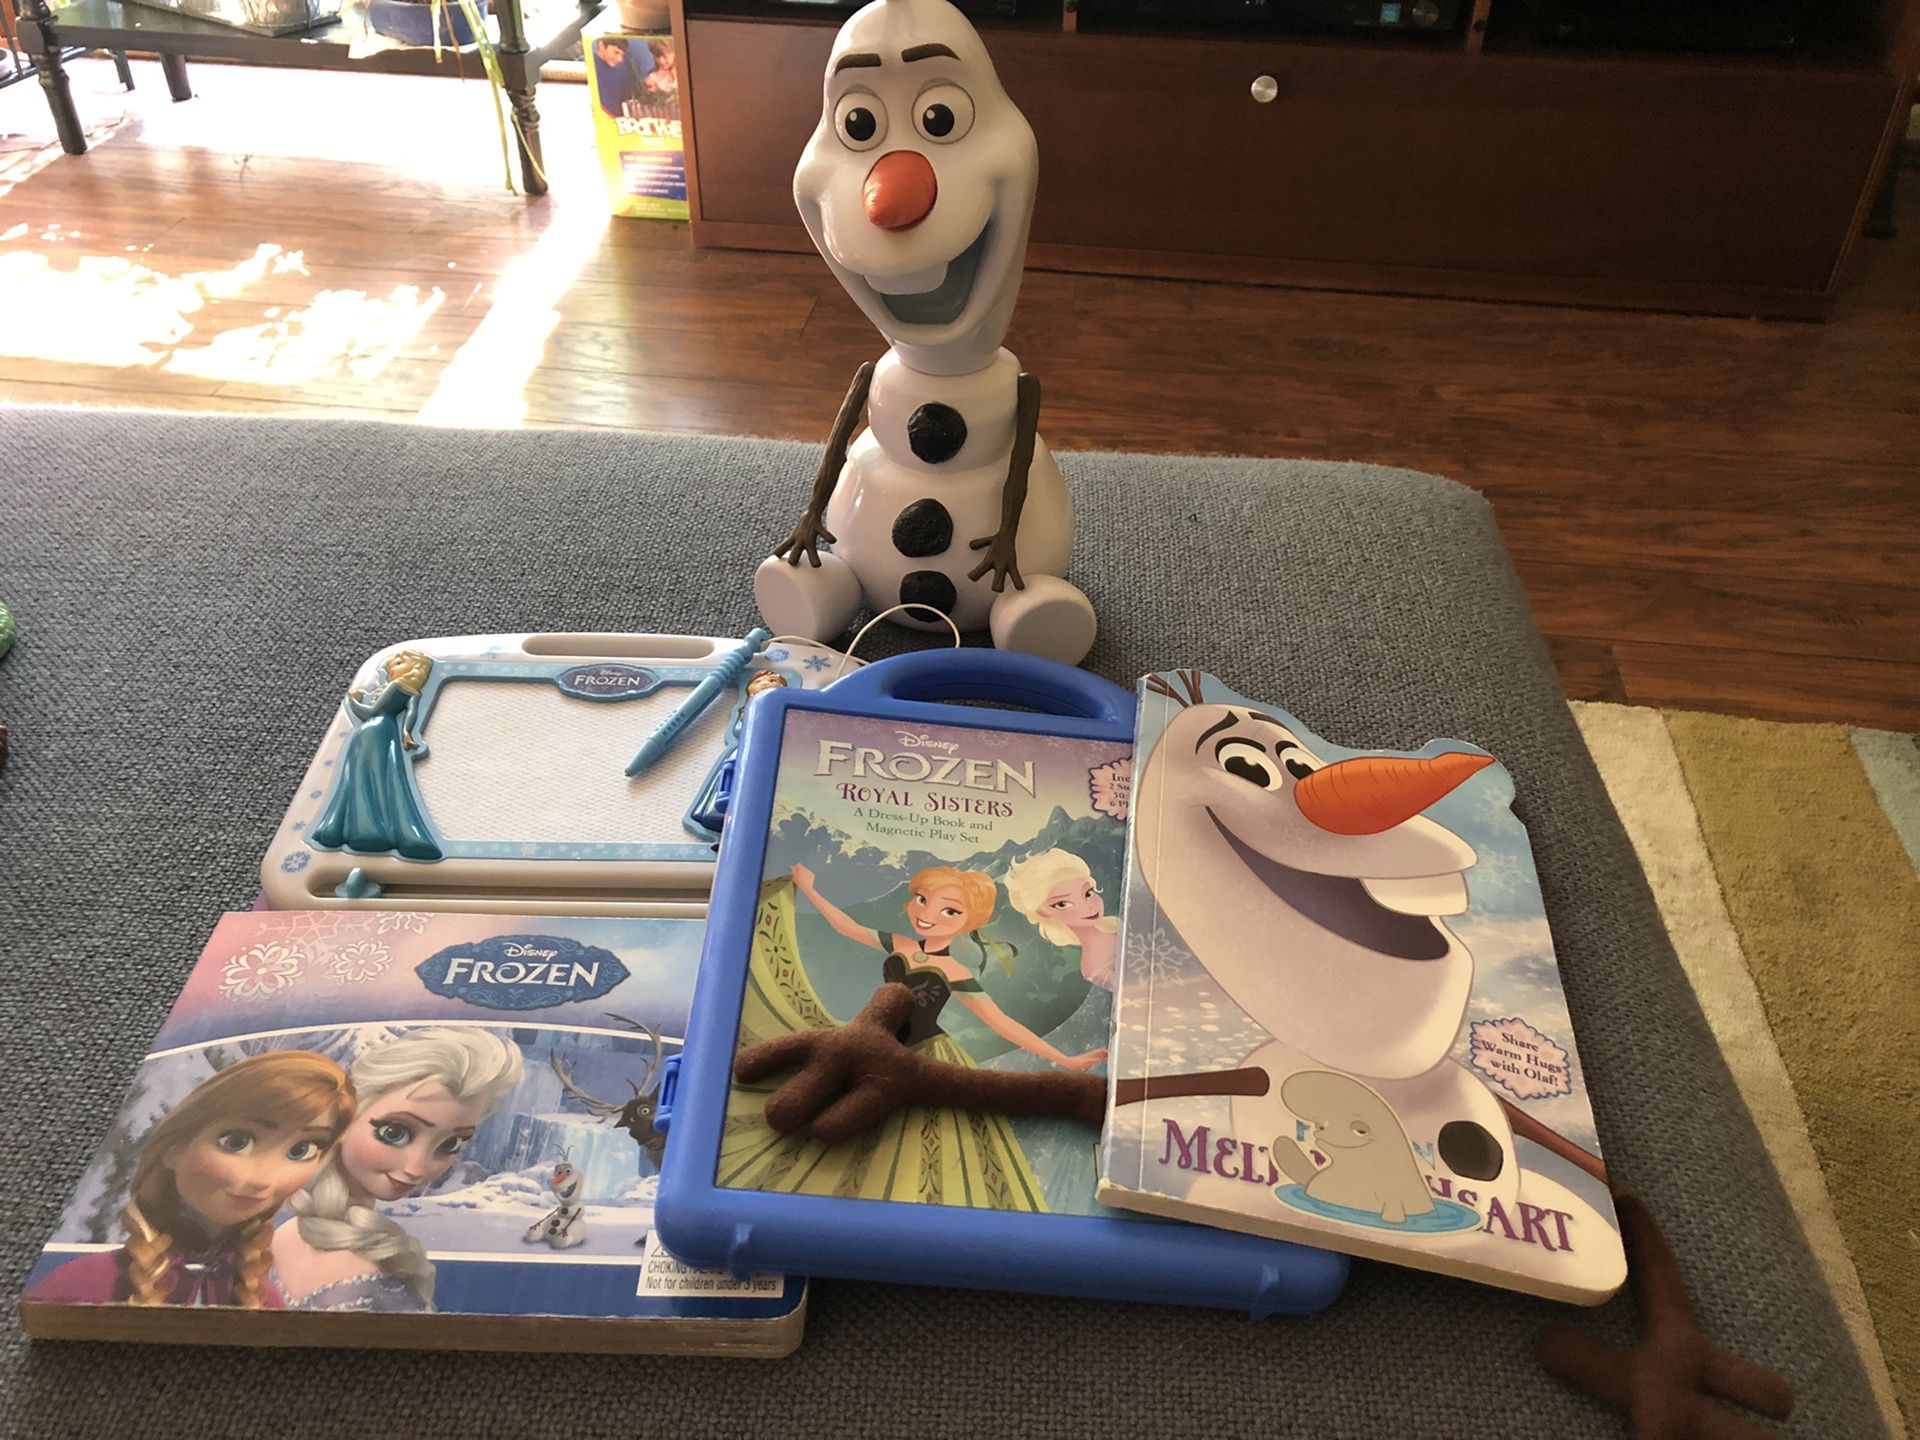 Frozen toy and books